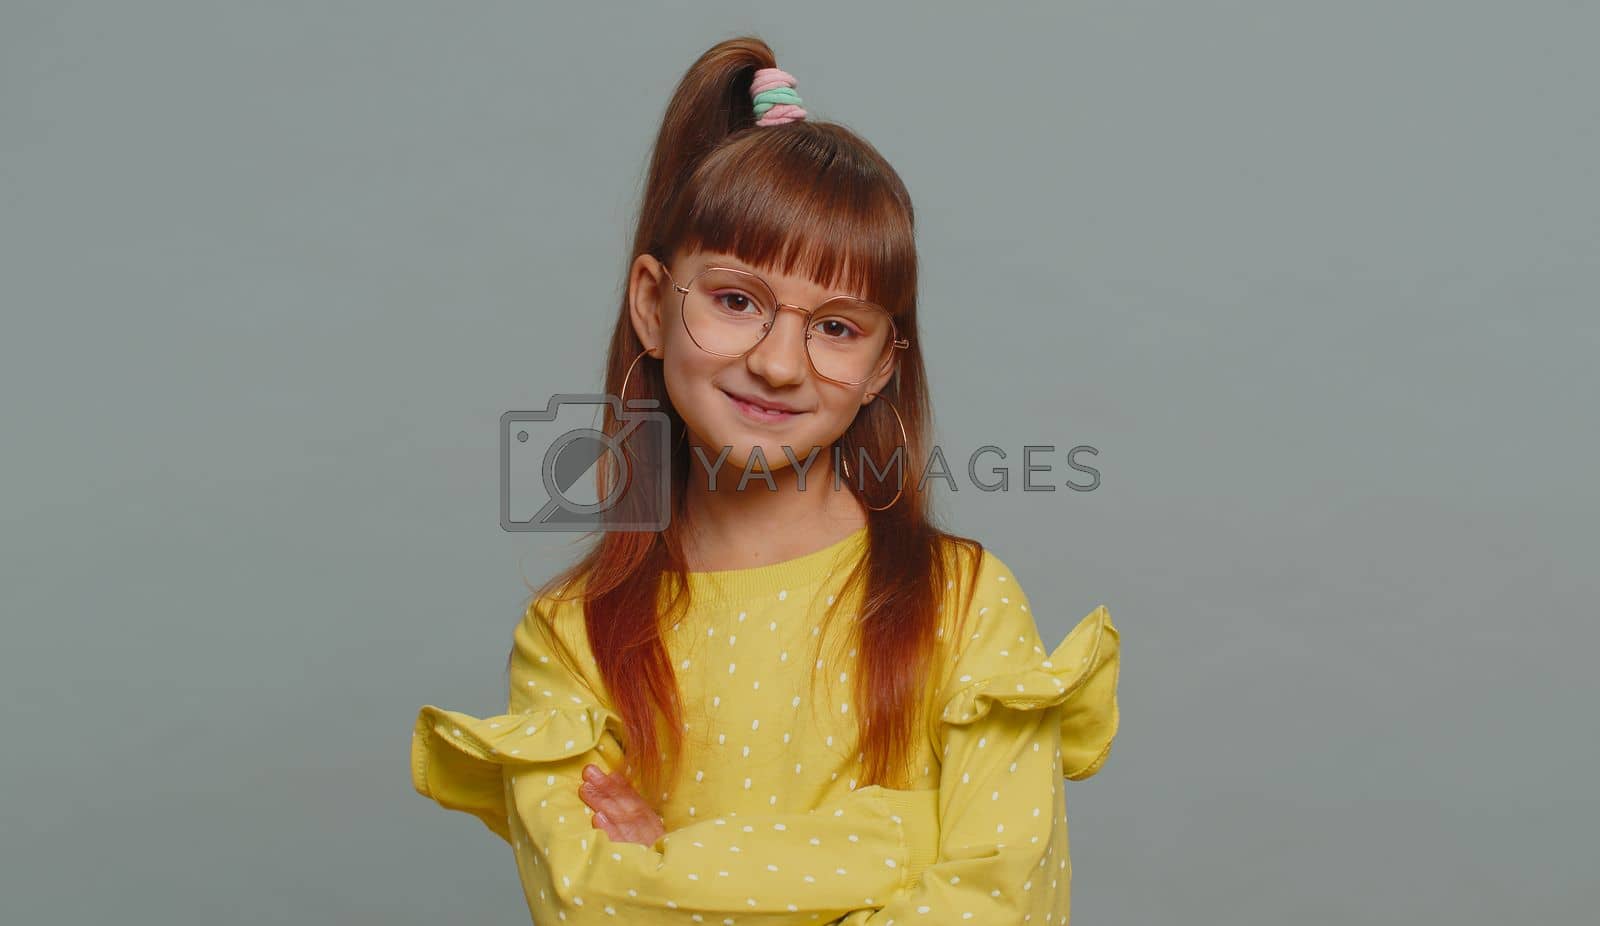 Royalty free image of Cheerful lovely young preteen child girl kid smiling, looking at camera on studio gray background by efuror